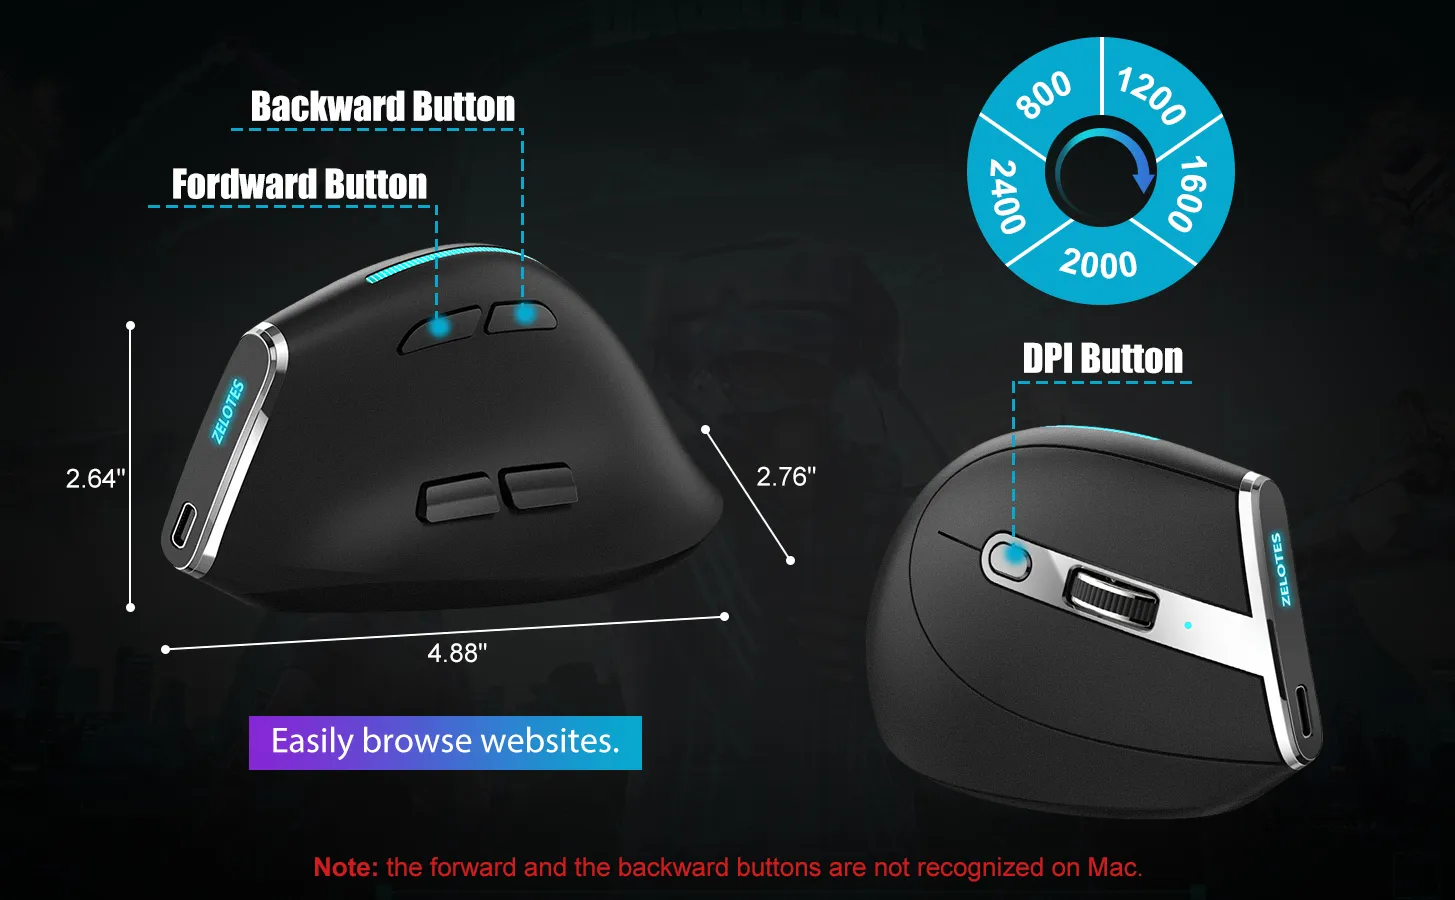 Lefon Bluetooth Vertical Mouse Wireless Ergonomic Mice with OLED Screen RGB USB Optical Rechargeable Mouse for PC Laptop Gaming